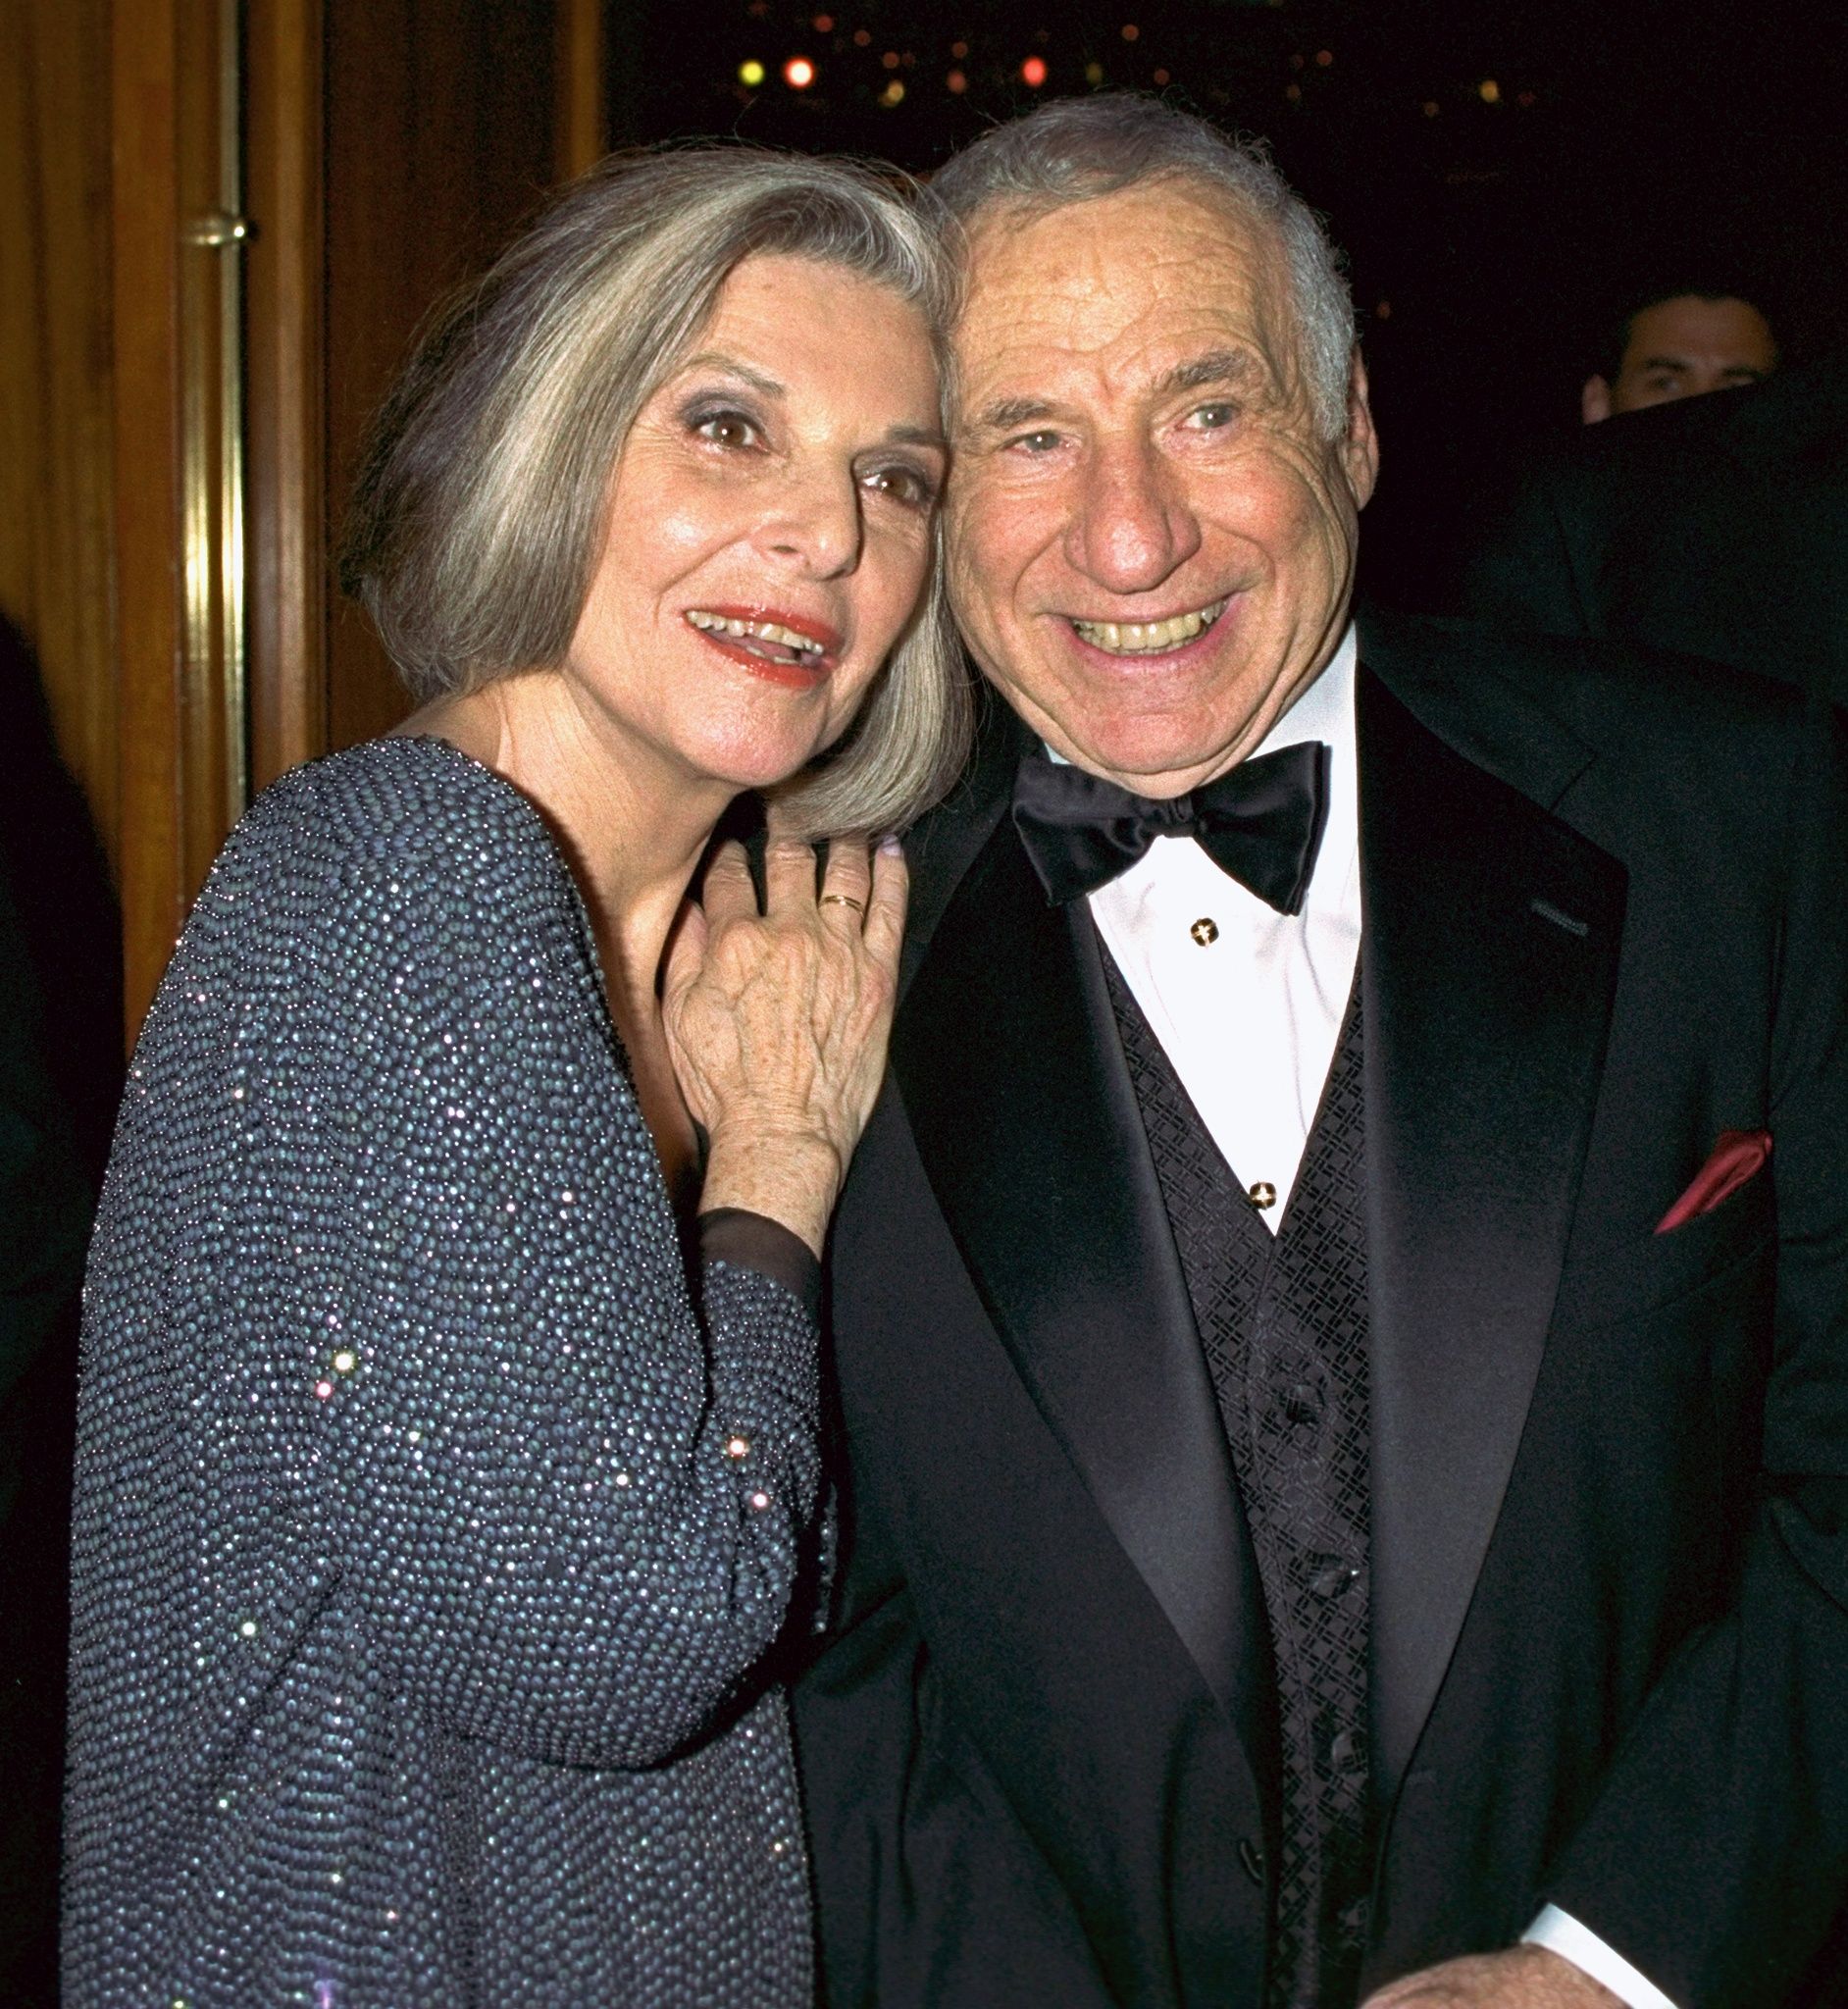 Mel Brooks and Anne Bancroft at the Sheraton Hotel, circa 2000. | Source: Getty Images